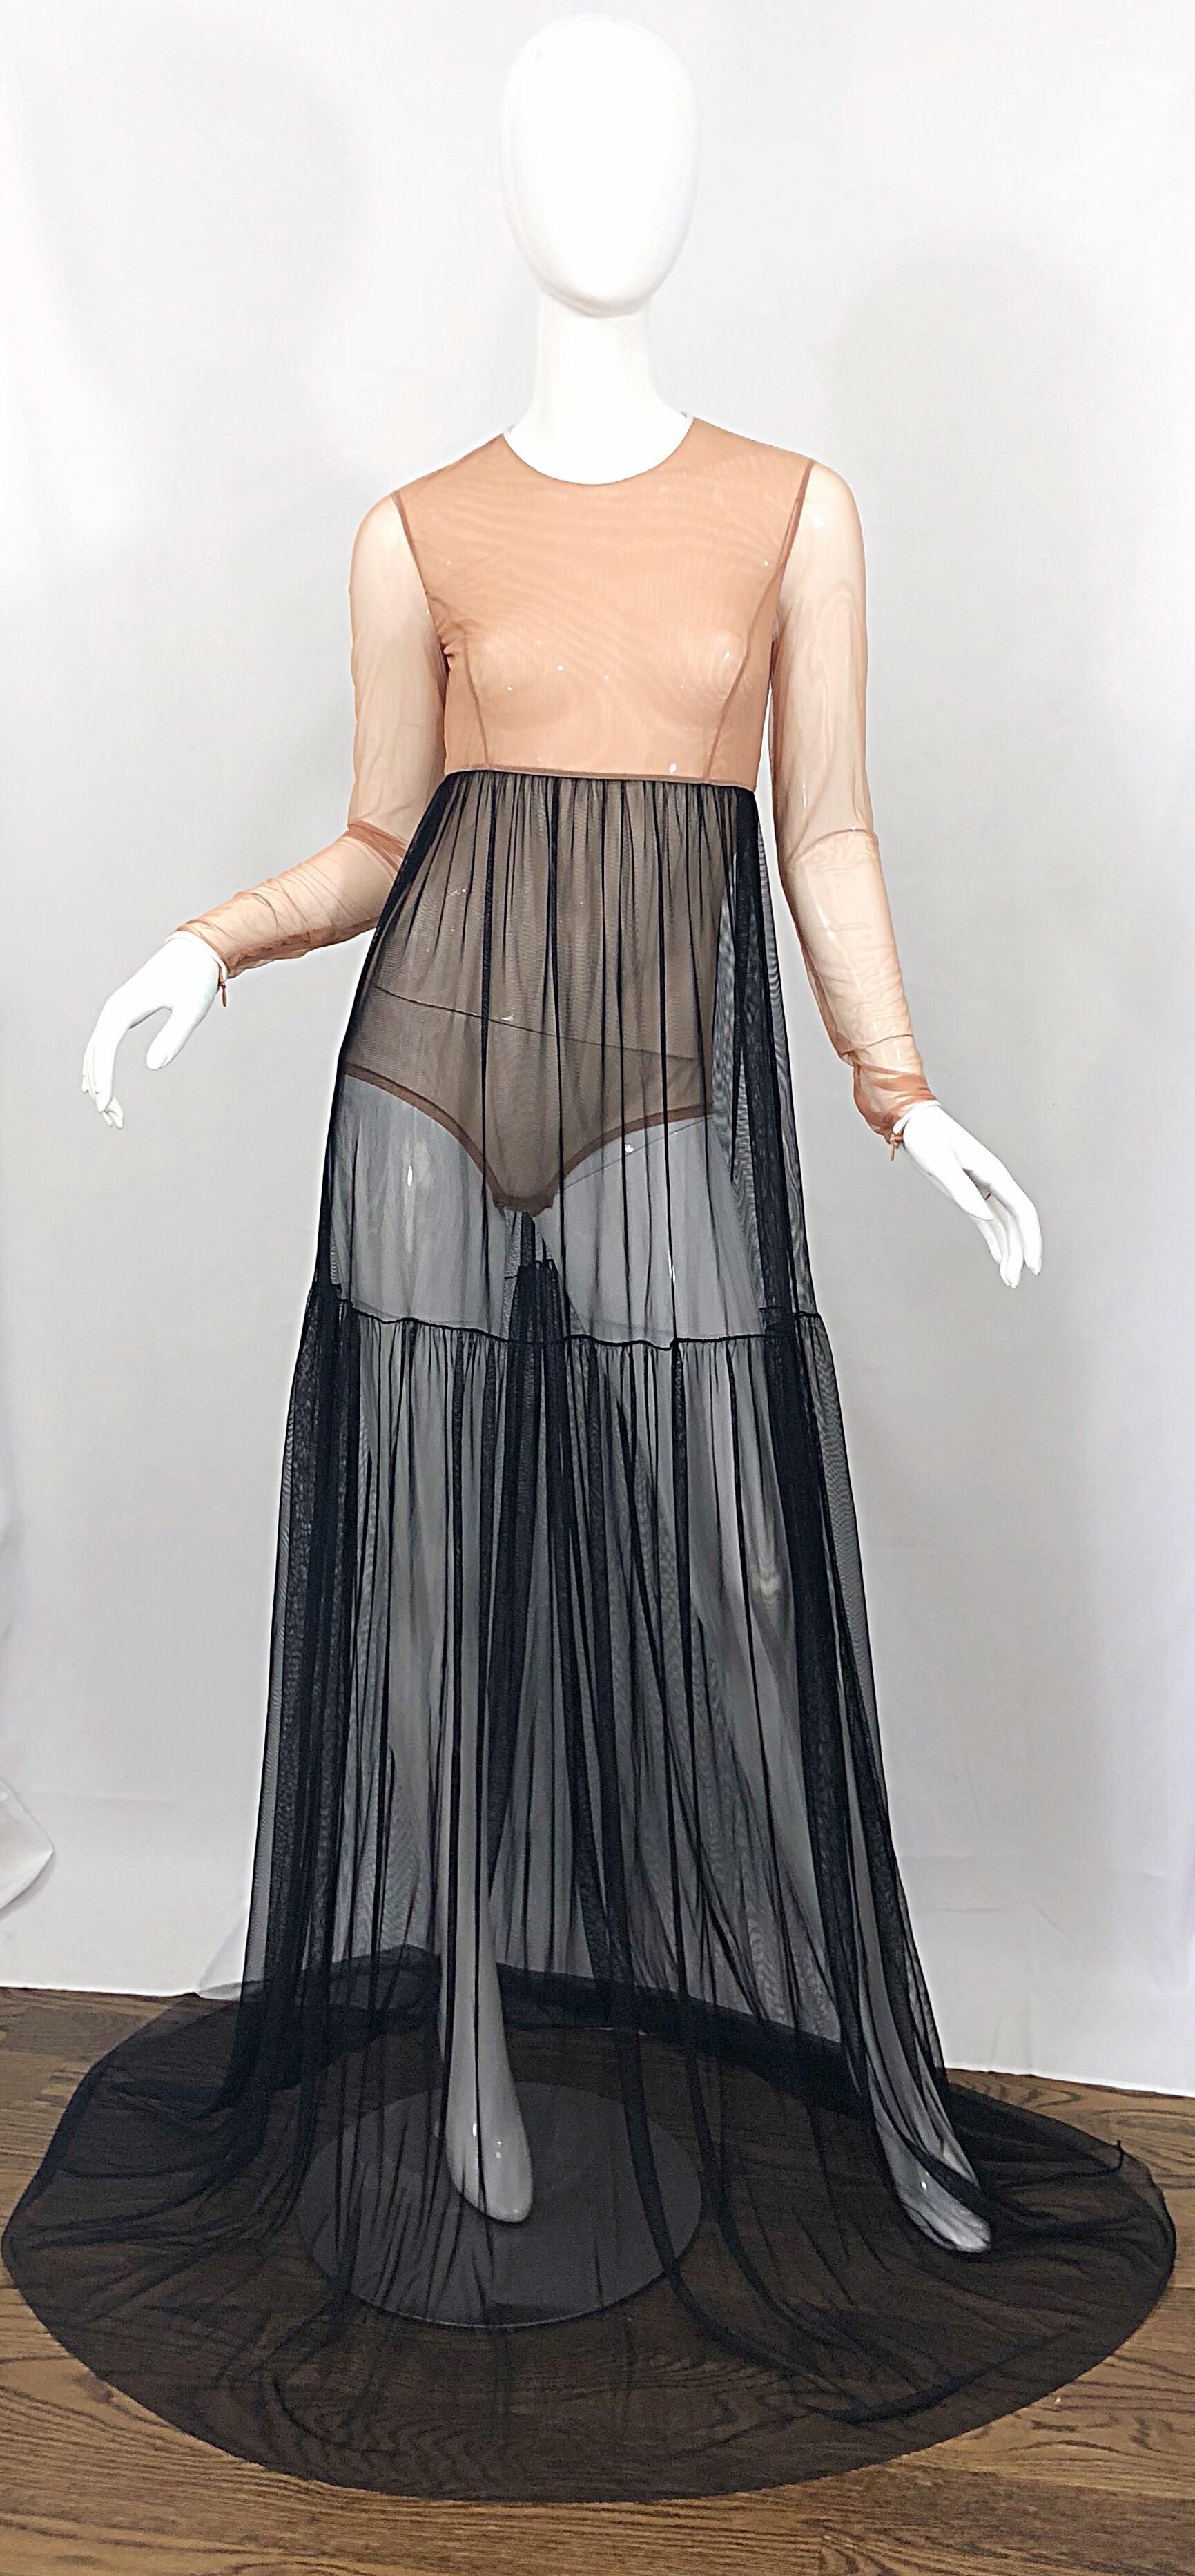 Sexy MICHAEL KORS COLLECTION nude and black sheer bodysuit gown! Features an attached nude bodysuit, with a black high waisted mesh skirt. White trim at neck and sleeves. Hidden zipper at each sleeve cuff. Extra long train adds a dramatic effect,